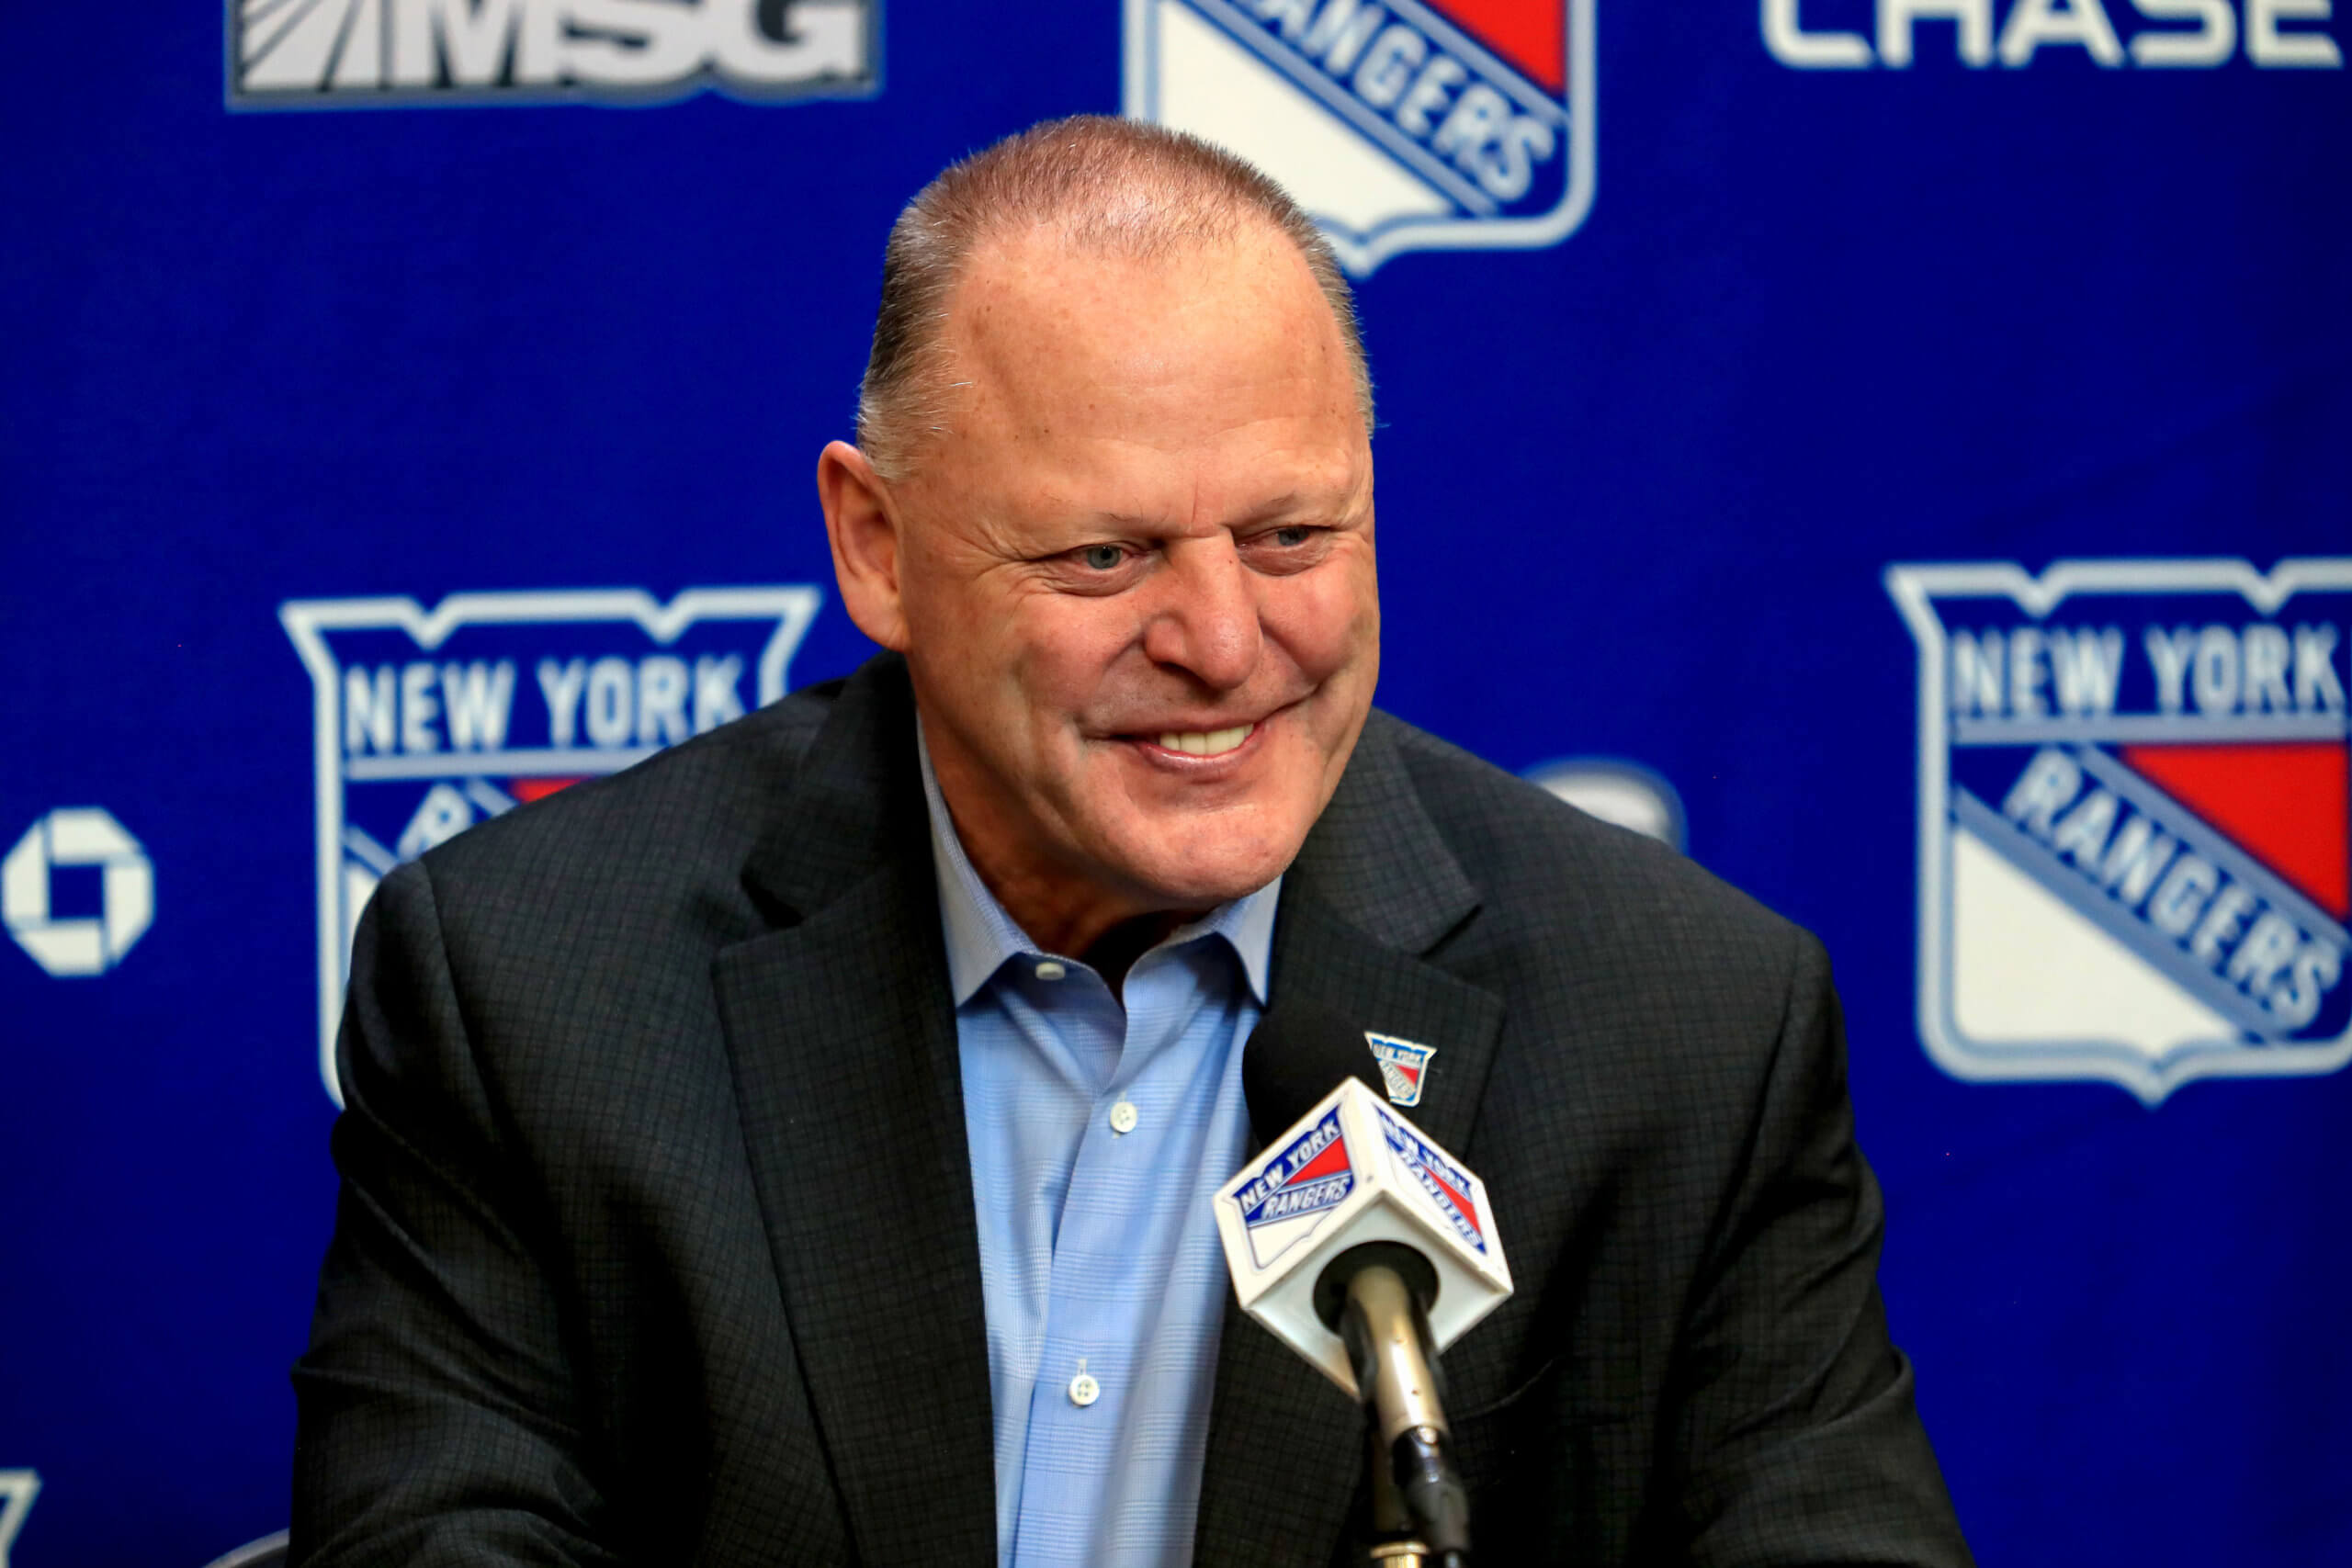 Rangers coach Gerard Gallant blasts team for not showing up in Game 4